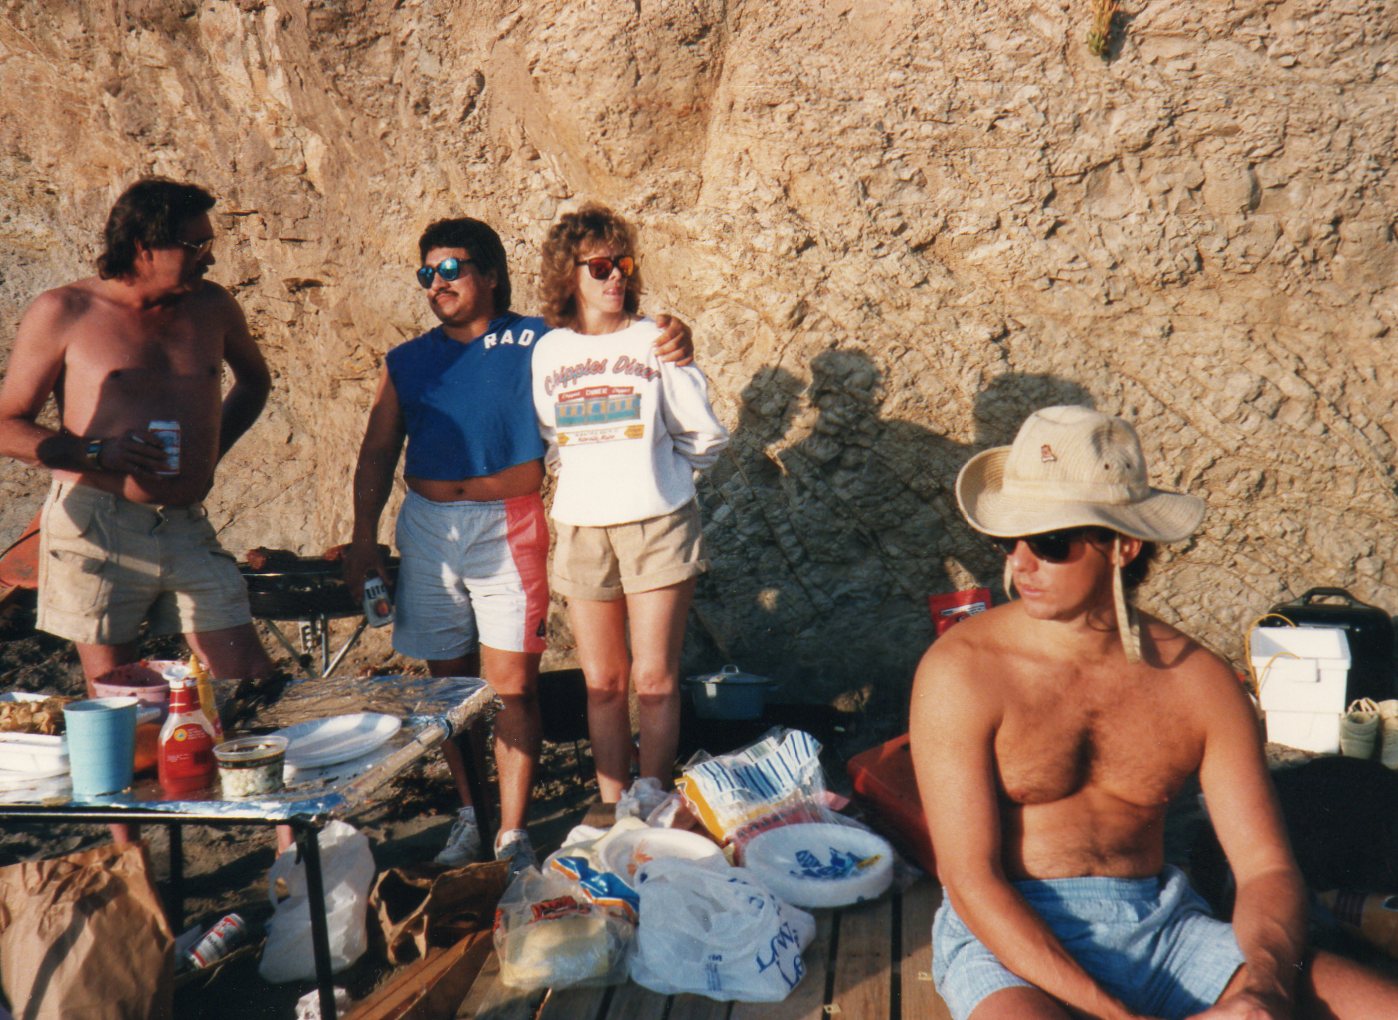 Shell Beach party ~1988
John Mojica cooking tri-tip with Sheila and me wondering where the future ex-wife is.
